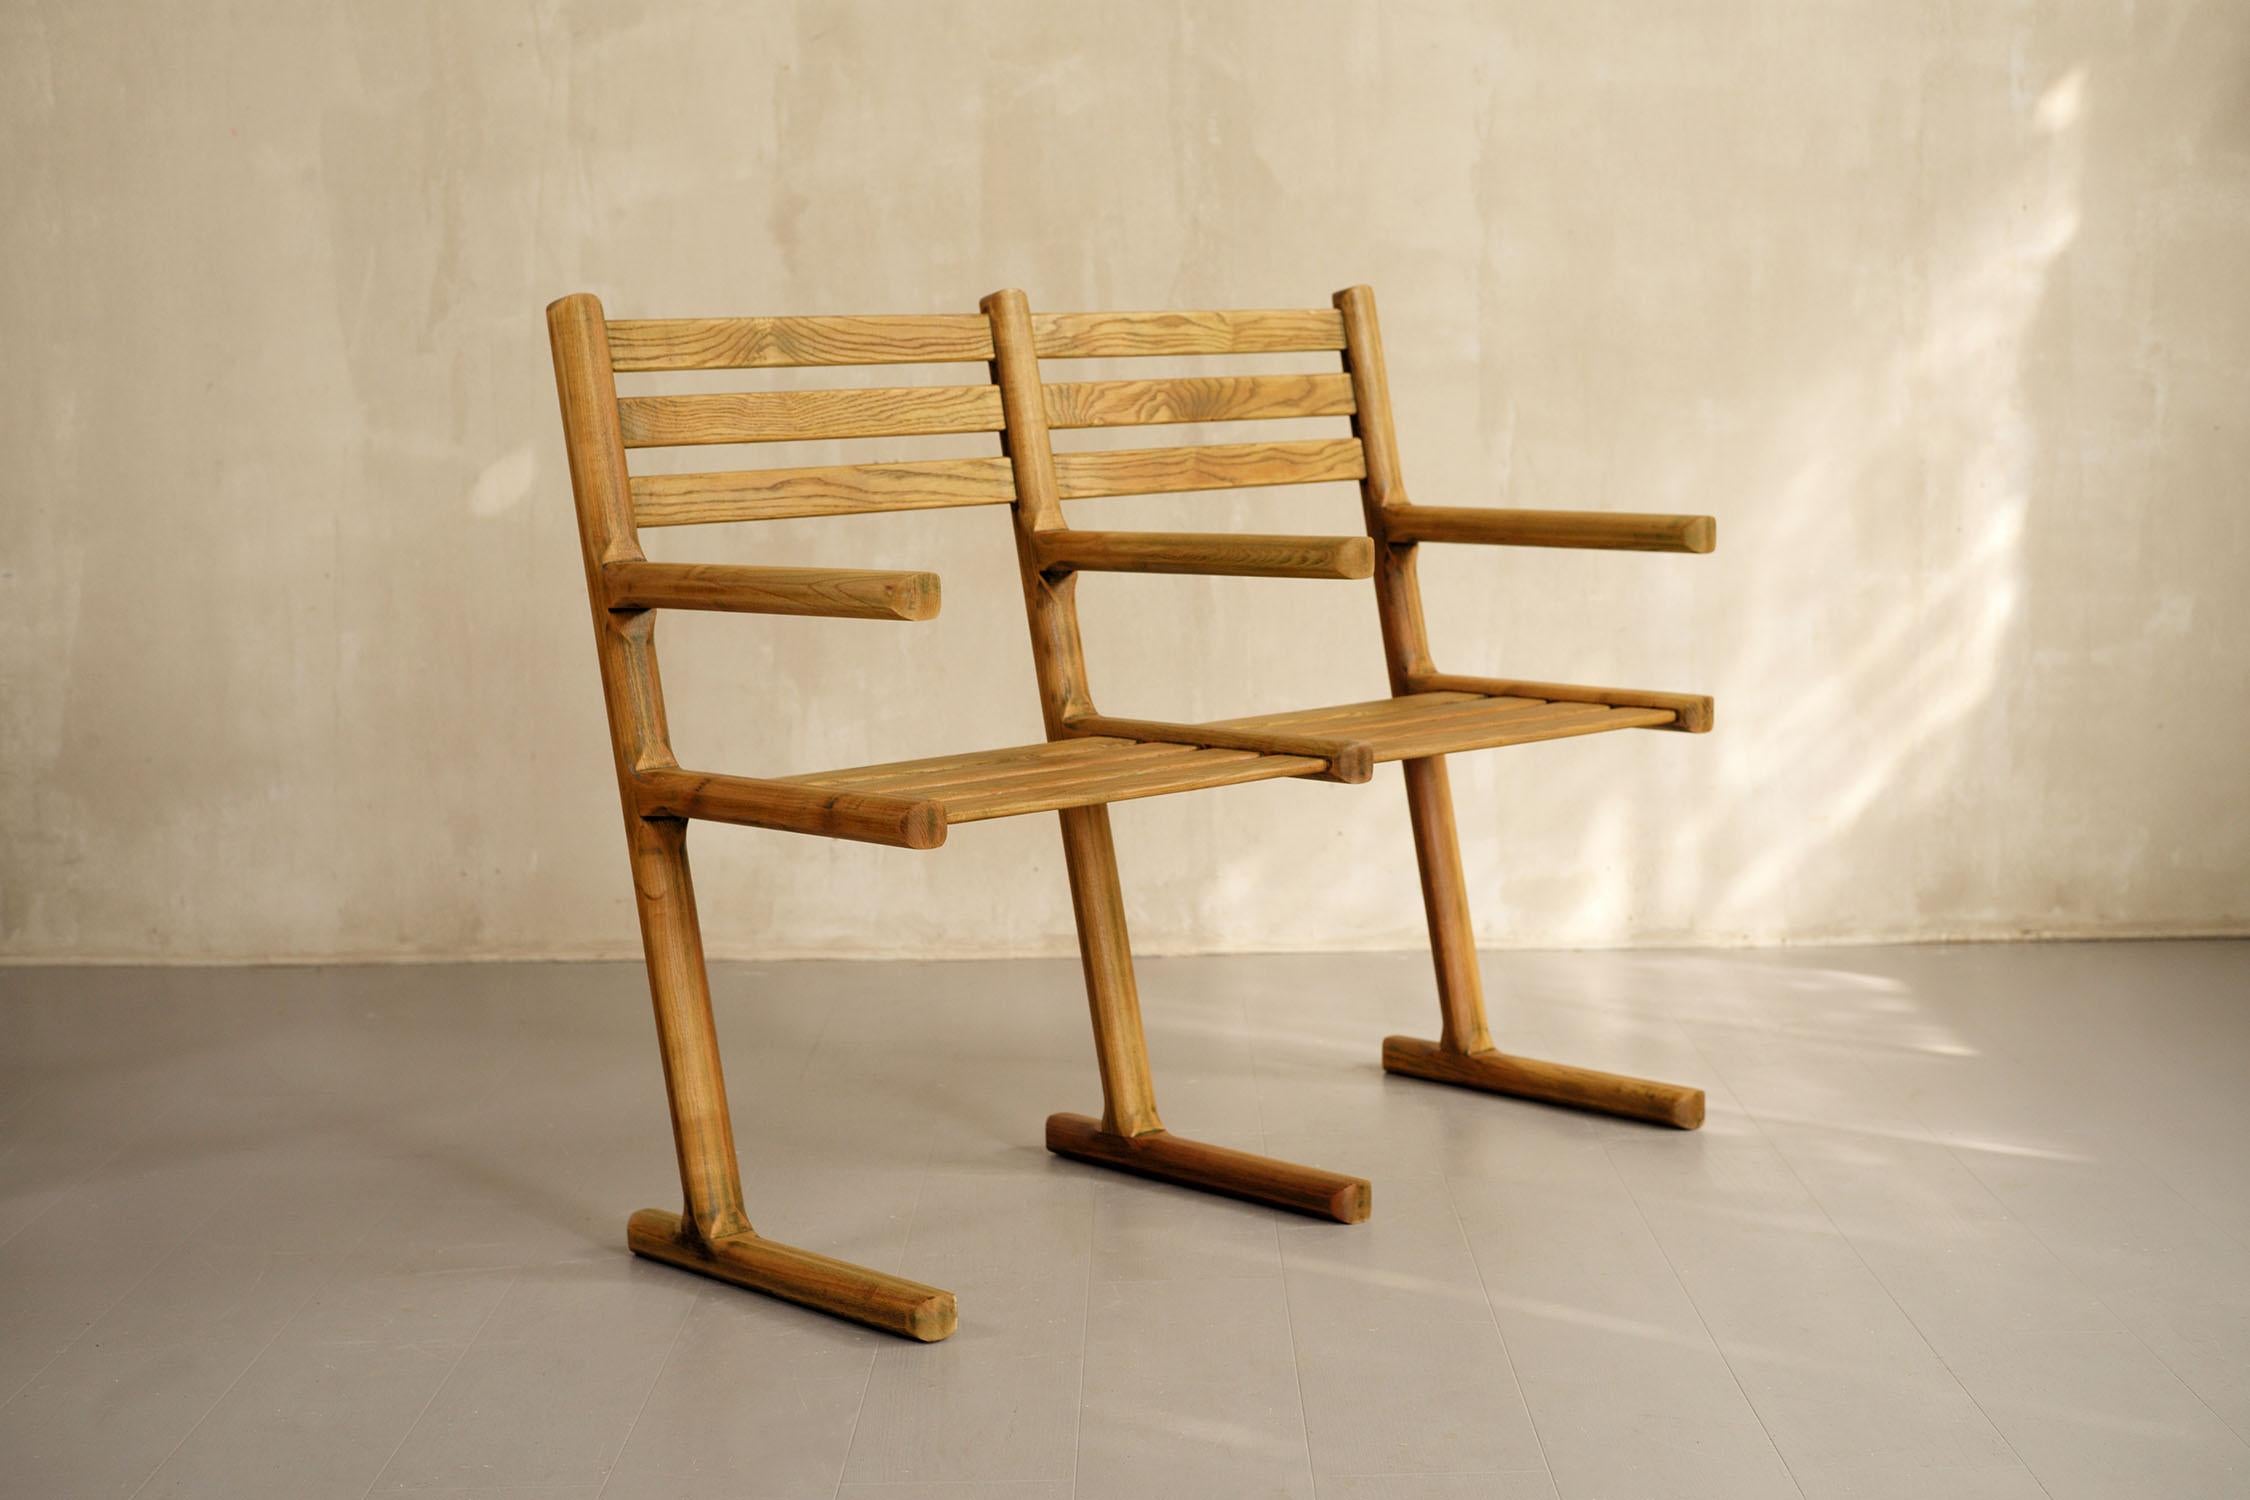 Set of 4 chairs and 1 bench with sled base, slatted seat and backrest, France, 1960. The beautifully crafted assembly work and the cantilever design give these seats an undeniable charm. They have been thoroughly cleaned and given a new oil-wax